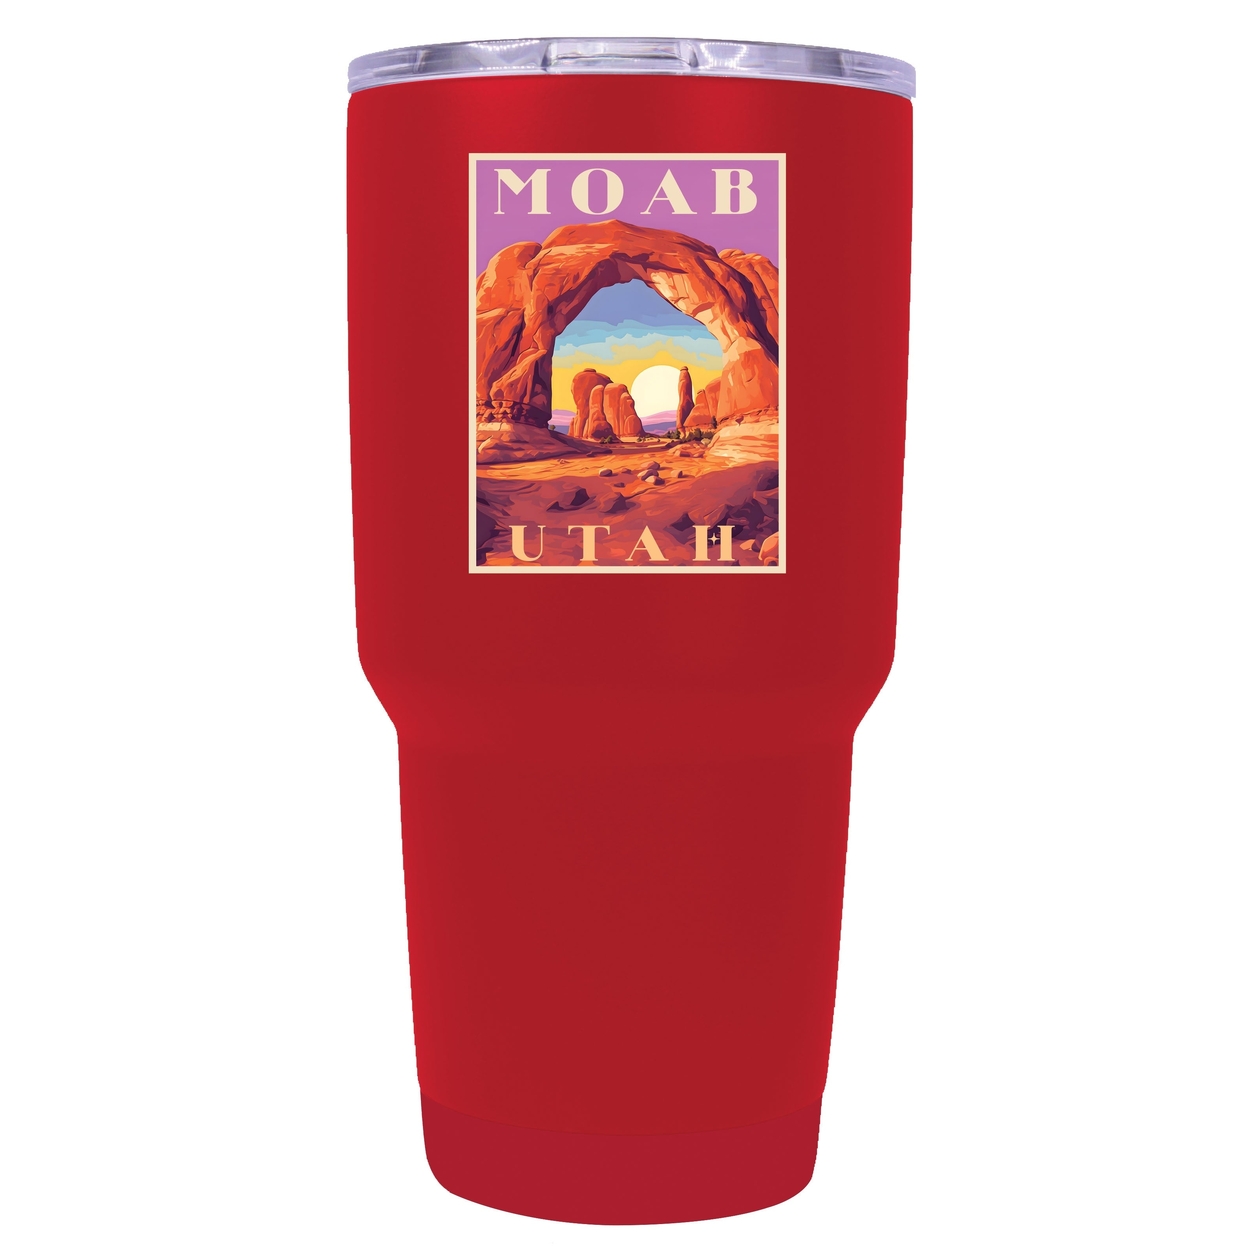 Moab Utah Souvenir 24 Oz Insulated Stainless Steel Tumbler - Red,,4-Pack